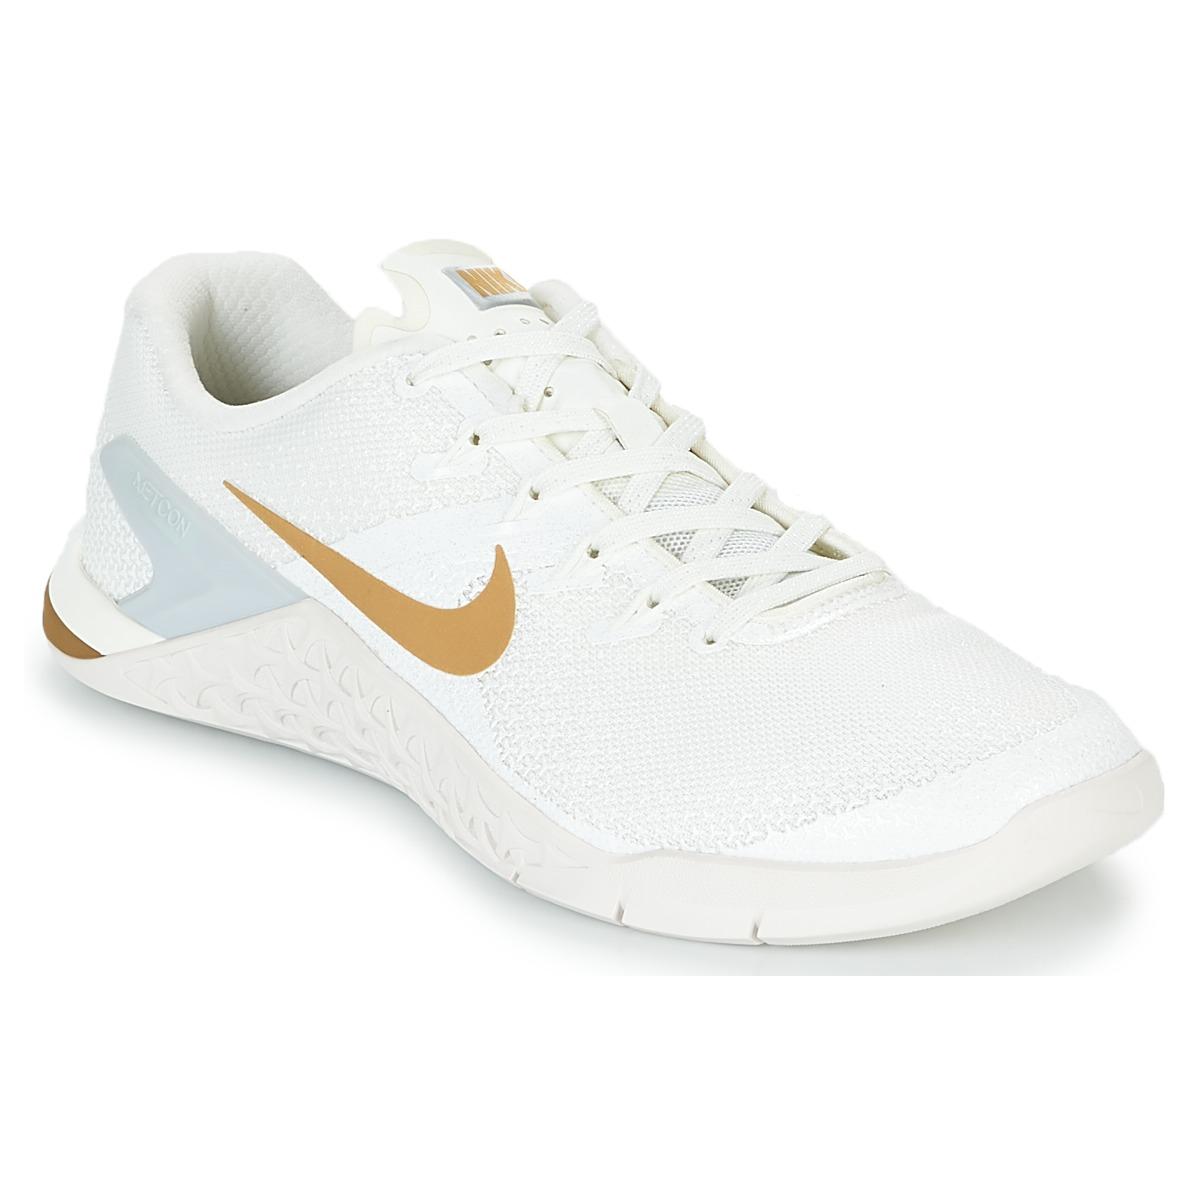 Nike Metcon 4 Champagne Trainers in Cream (White) - Lyst